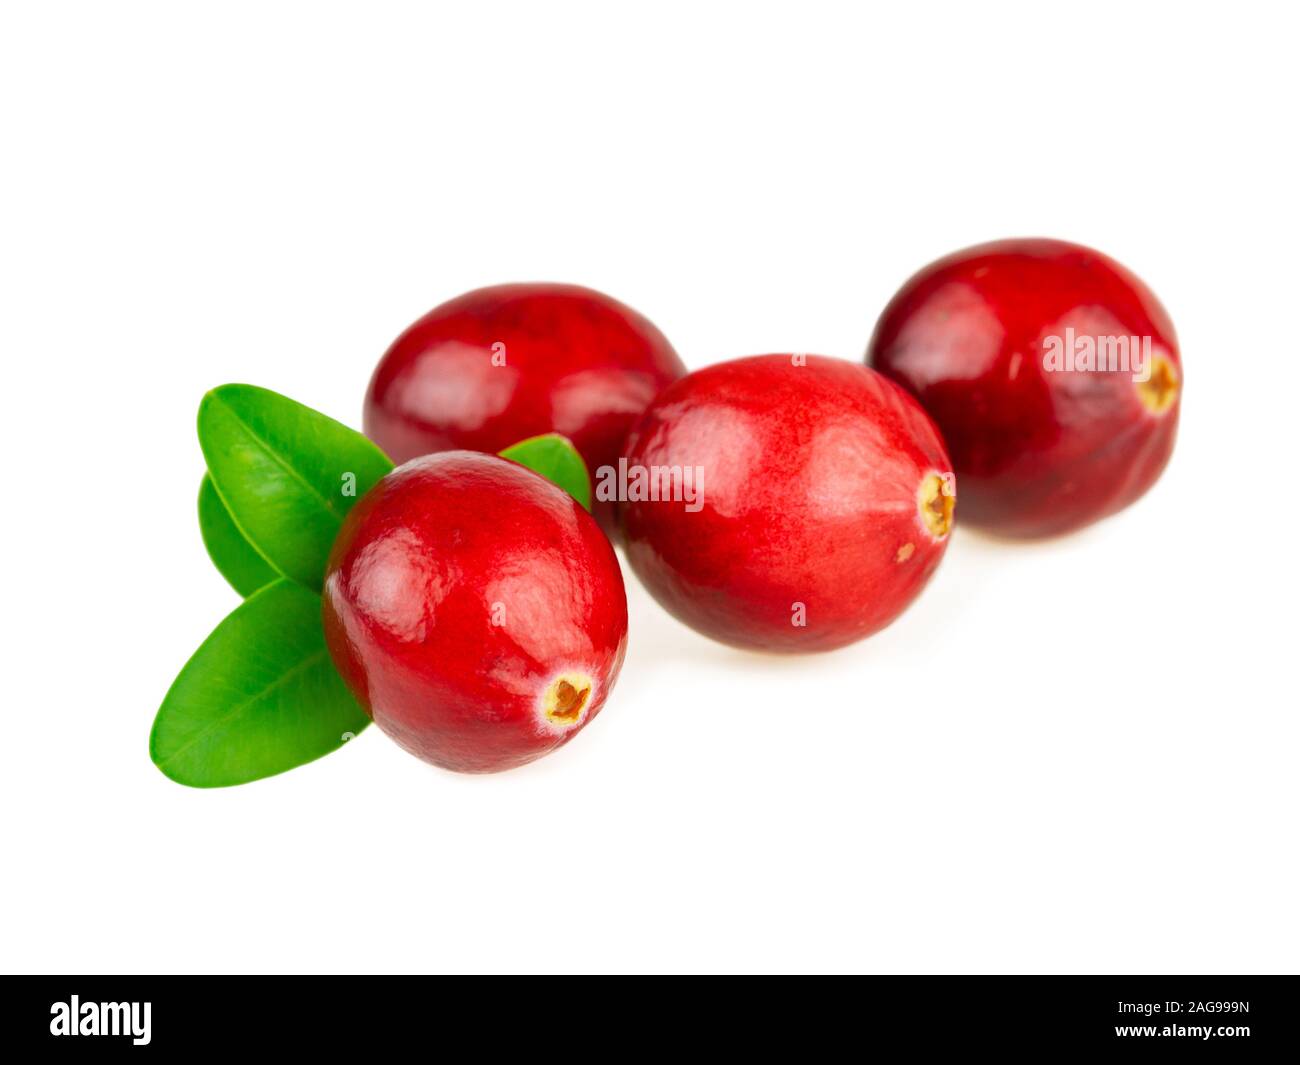 Cranberries Red Fresh Cranberry With Green Leaf On White Background Stock Photo